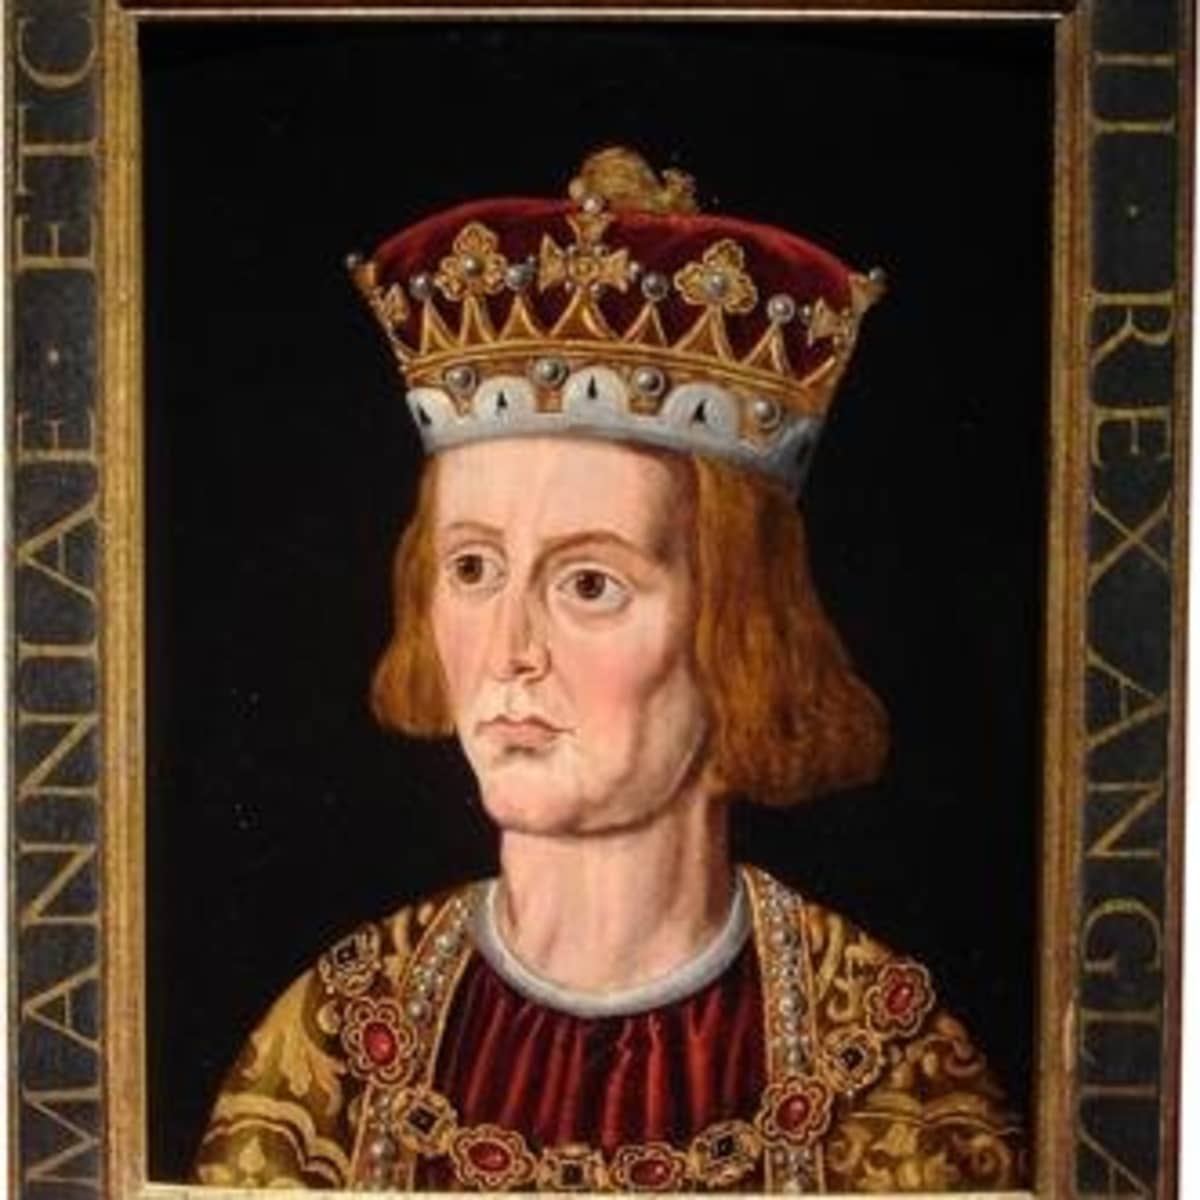 Kings and Queens of England, 1066-2010 - HubPages